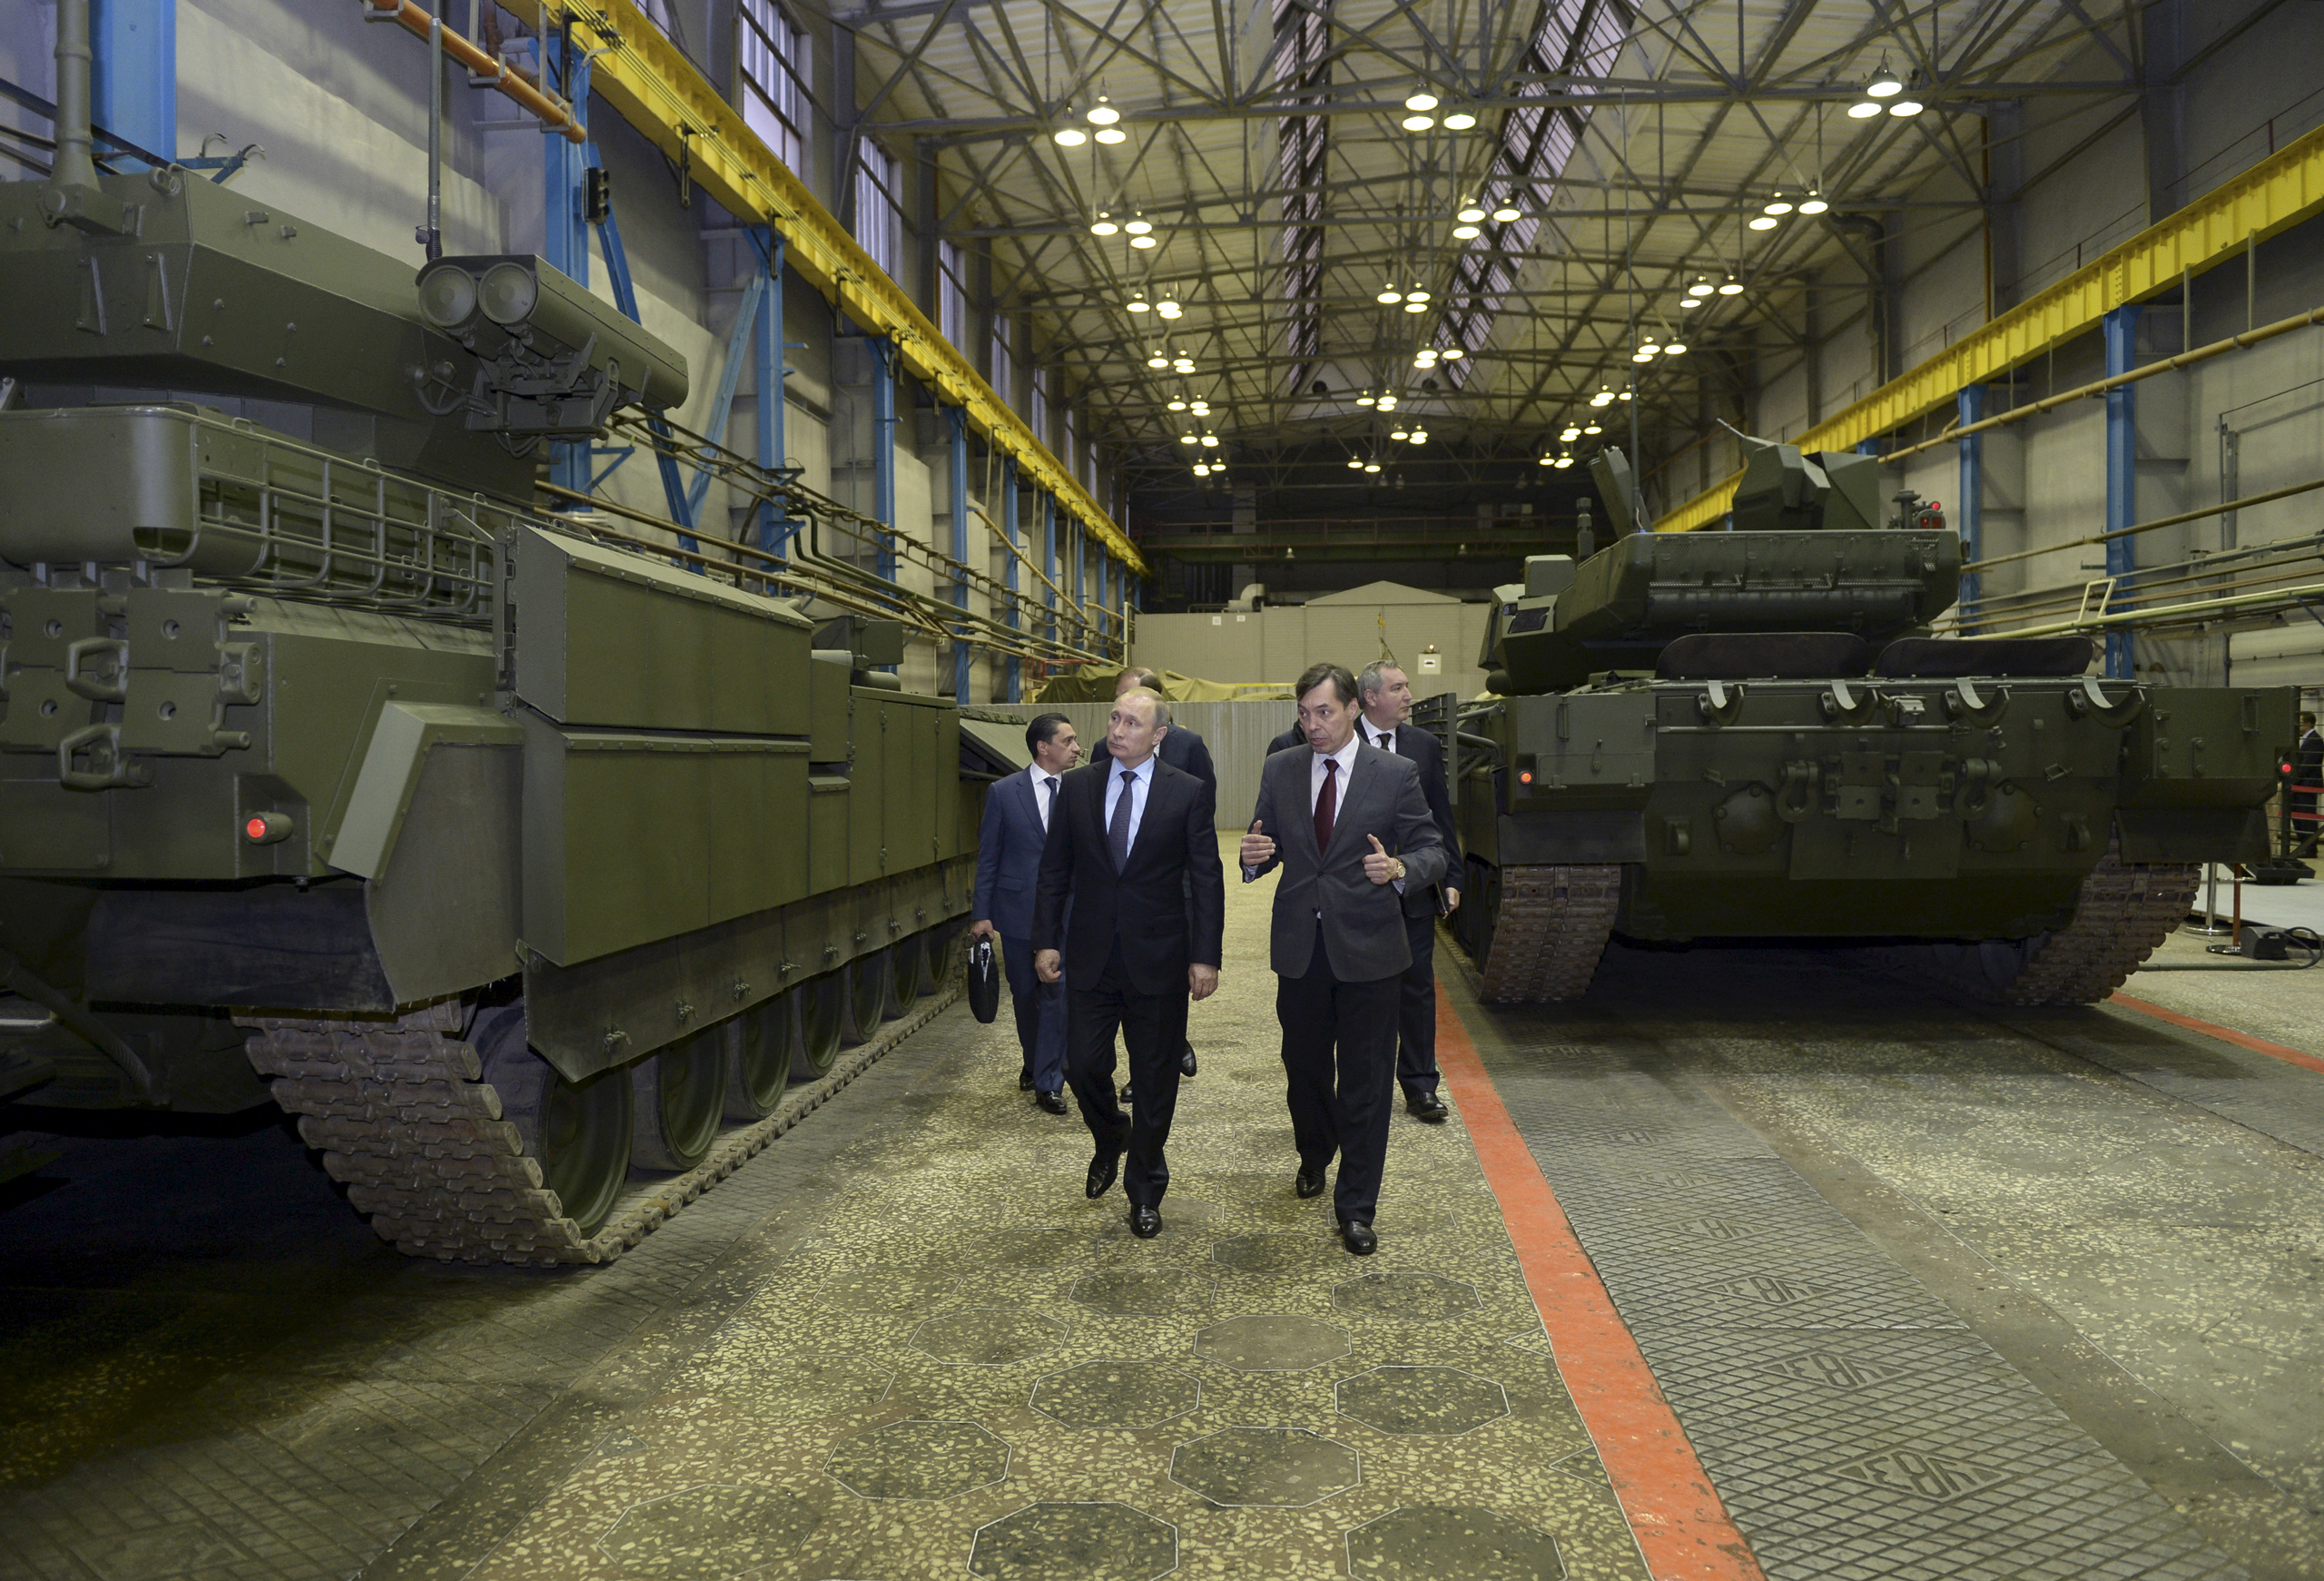 Russian President Vladimir Putin (L) listens to Andrei Terlikov, the head of the Ural Transport Machine Building Design Bureau, as they watch Russian infantry fighting vehicle with the Armata Universal Combat Platform and a T-14 Armata main battle tank at he Uralvagonzavod factory in the Urals city of Nizhny Tagil, Russia November 25, 2015. Speaking on a trip to the Ural mountains city of Nizhny Tagil, Putin ordered the despatch of an advanced weapons system to Russia's Khmeimim air base in Syria's Latakia province. REUTERS/Alexei Nikolskyi/Sputnik/Kremlin ATTENTION EDITORS - THIS IMAGE HAS BEEN SUPPLIED BY A THIRD PARTY. IT IS DISTRIBUTED, EXACTLY AS RECEIVED BY REUTERS, AS A SERVICE TO CLIENTS.      TPX IMAGES OF THE DAY      - RTX1VS87